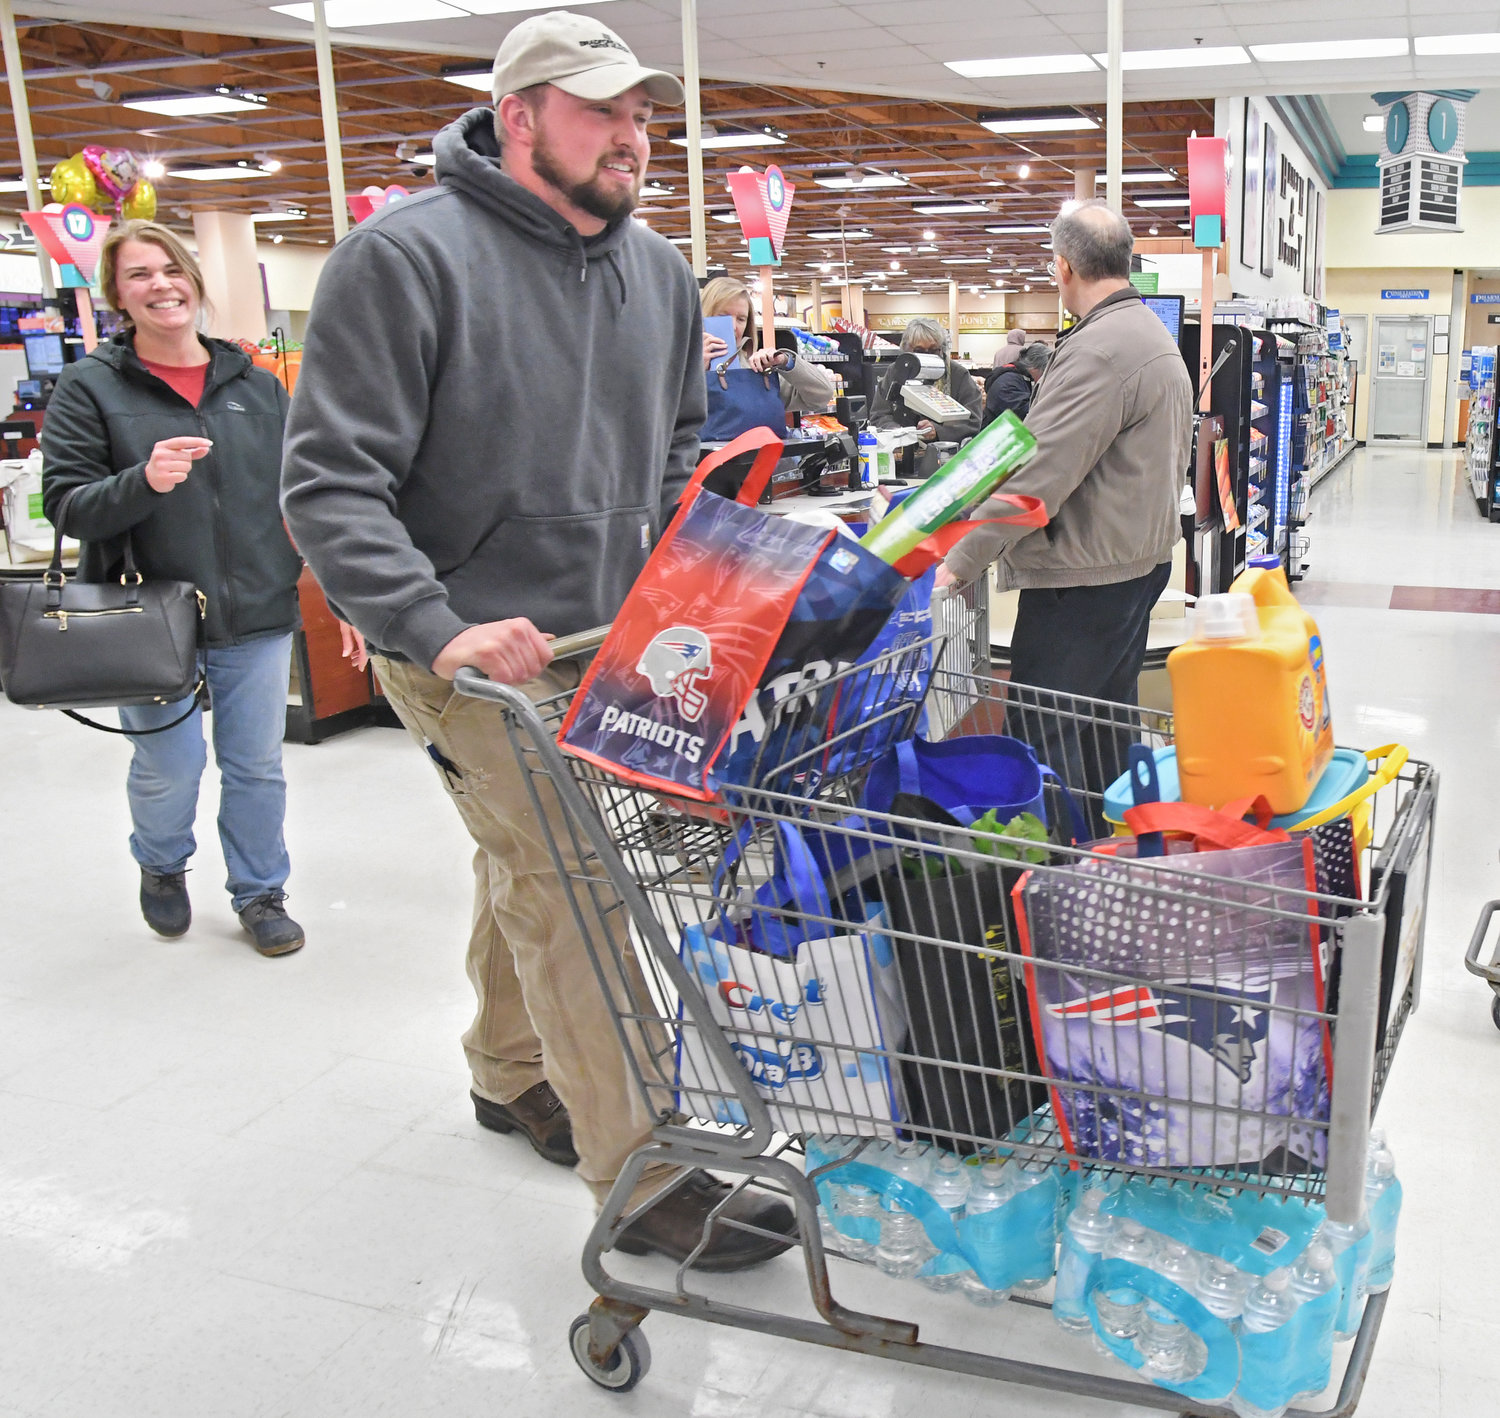 BAGGED — Ed Bentley, followed by his mother Debbie Bentley, carts away groceries that he bagged up in reusable bags Friday afternoon at Price Chopper on Black River Boulevard in Rome. Most of the Bentleys’ bags are from other stores, but Price Chopper says the company’s re-usable bags start at 50 cents each.